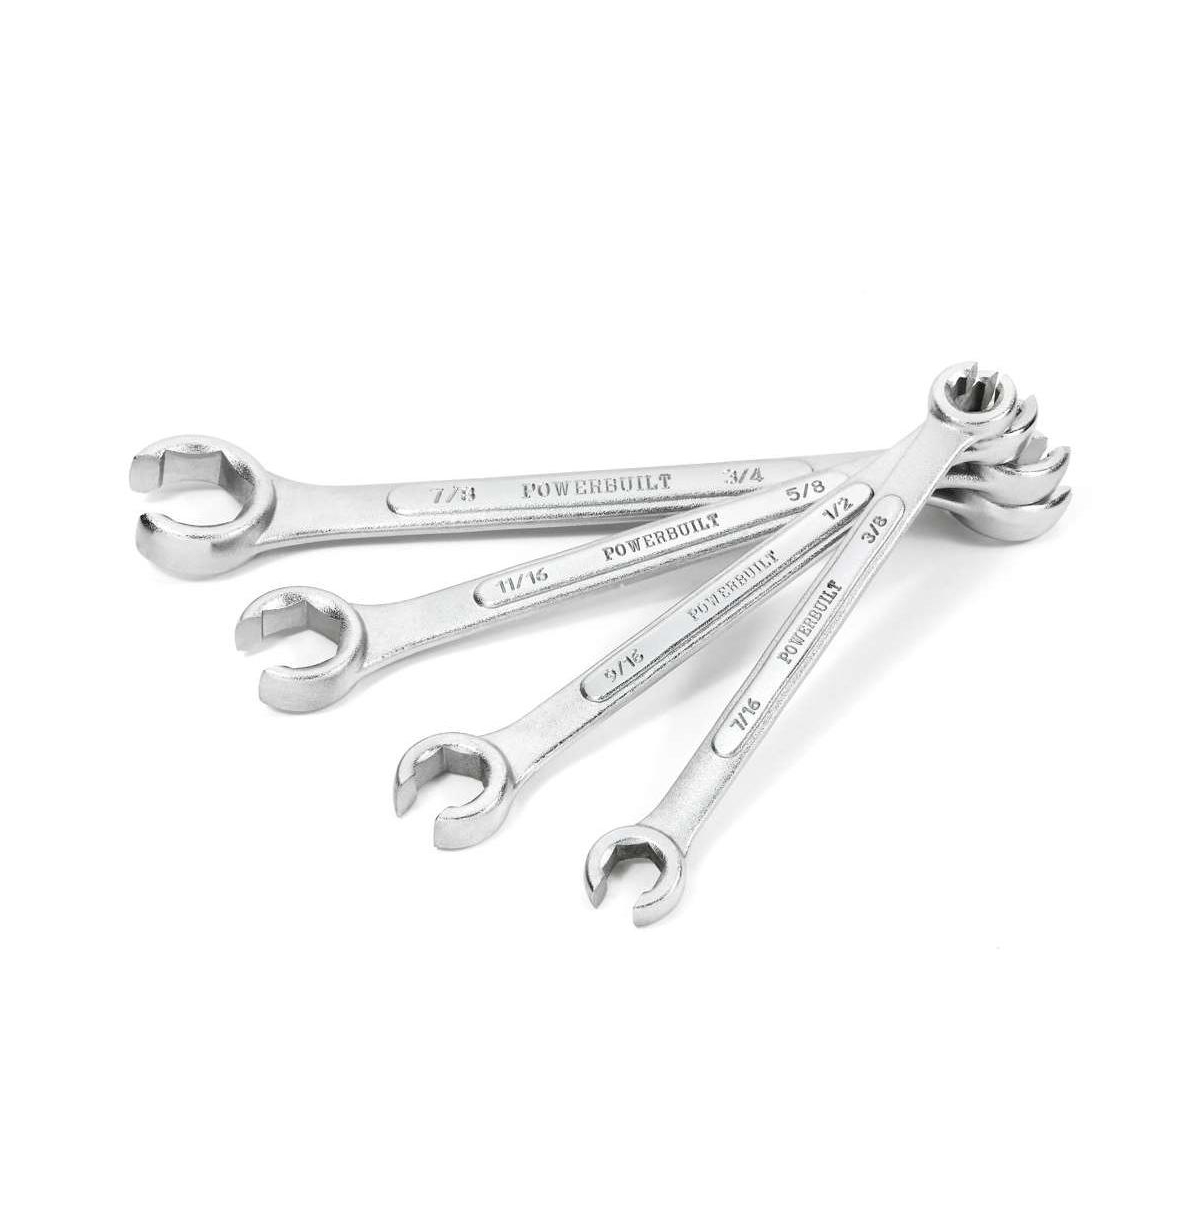 4 Piece Sae Flare Nut Wrench Set - Silver